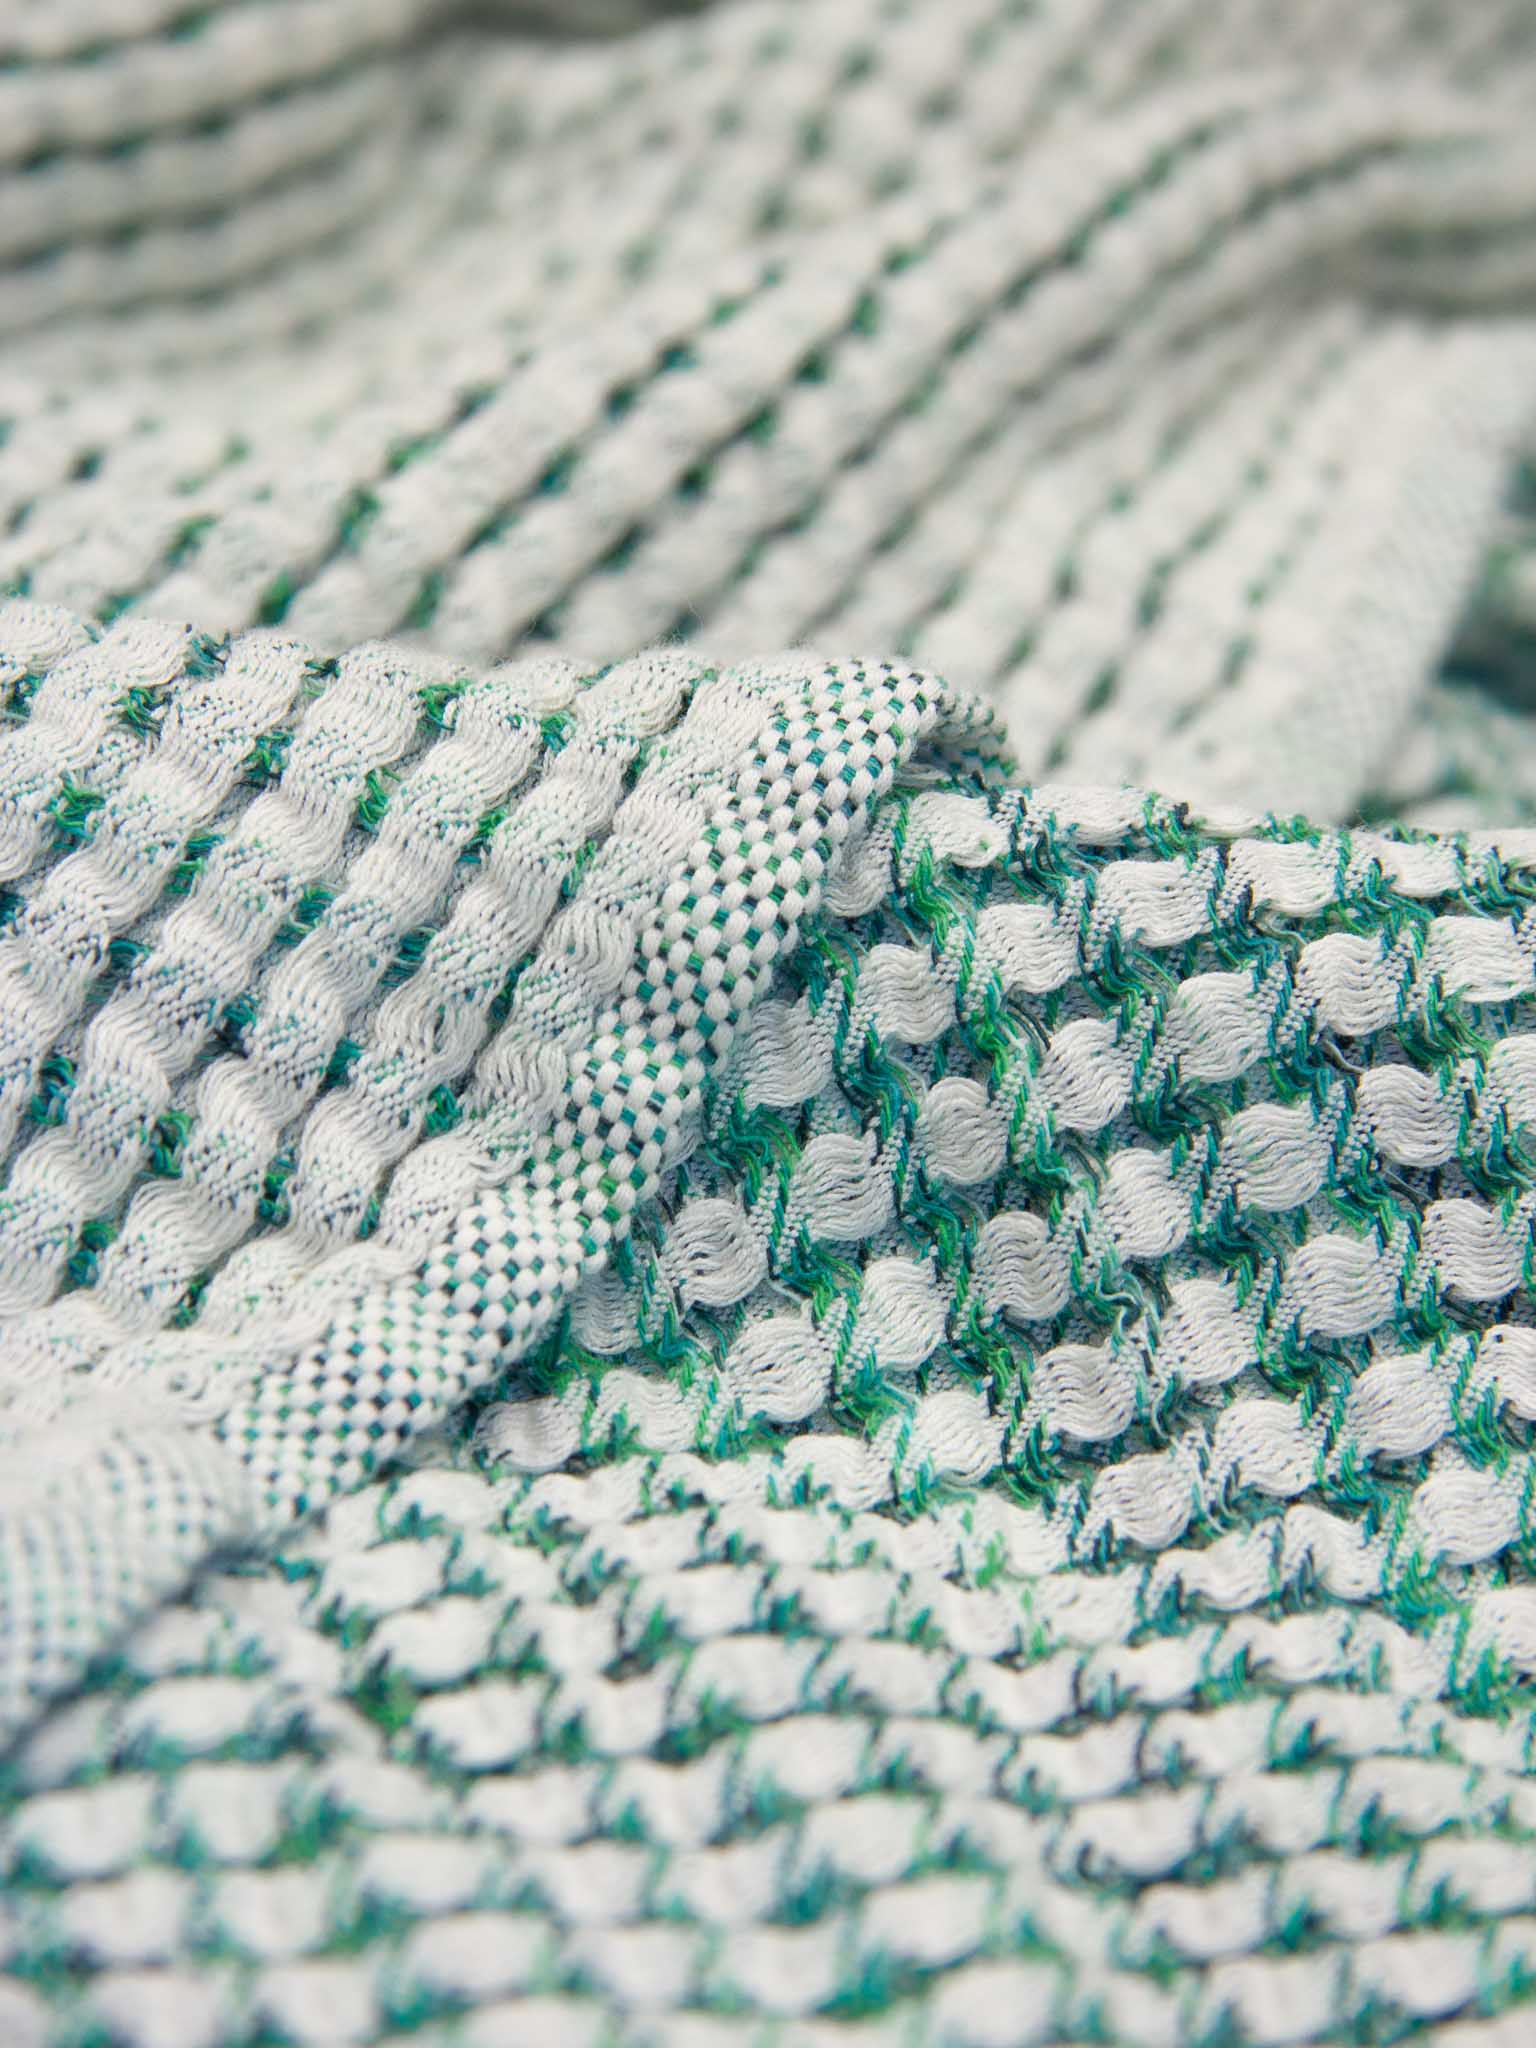 Green patterned double sided, honeycomb beach towel close up